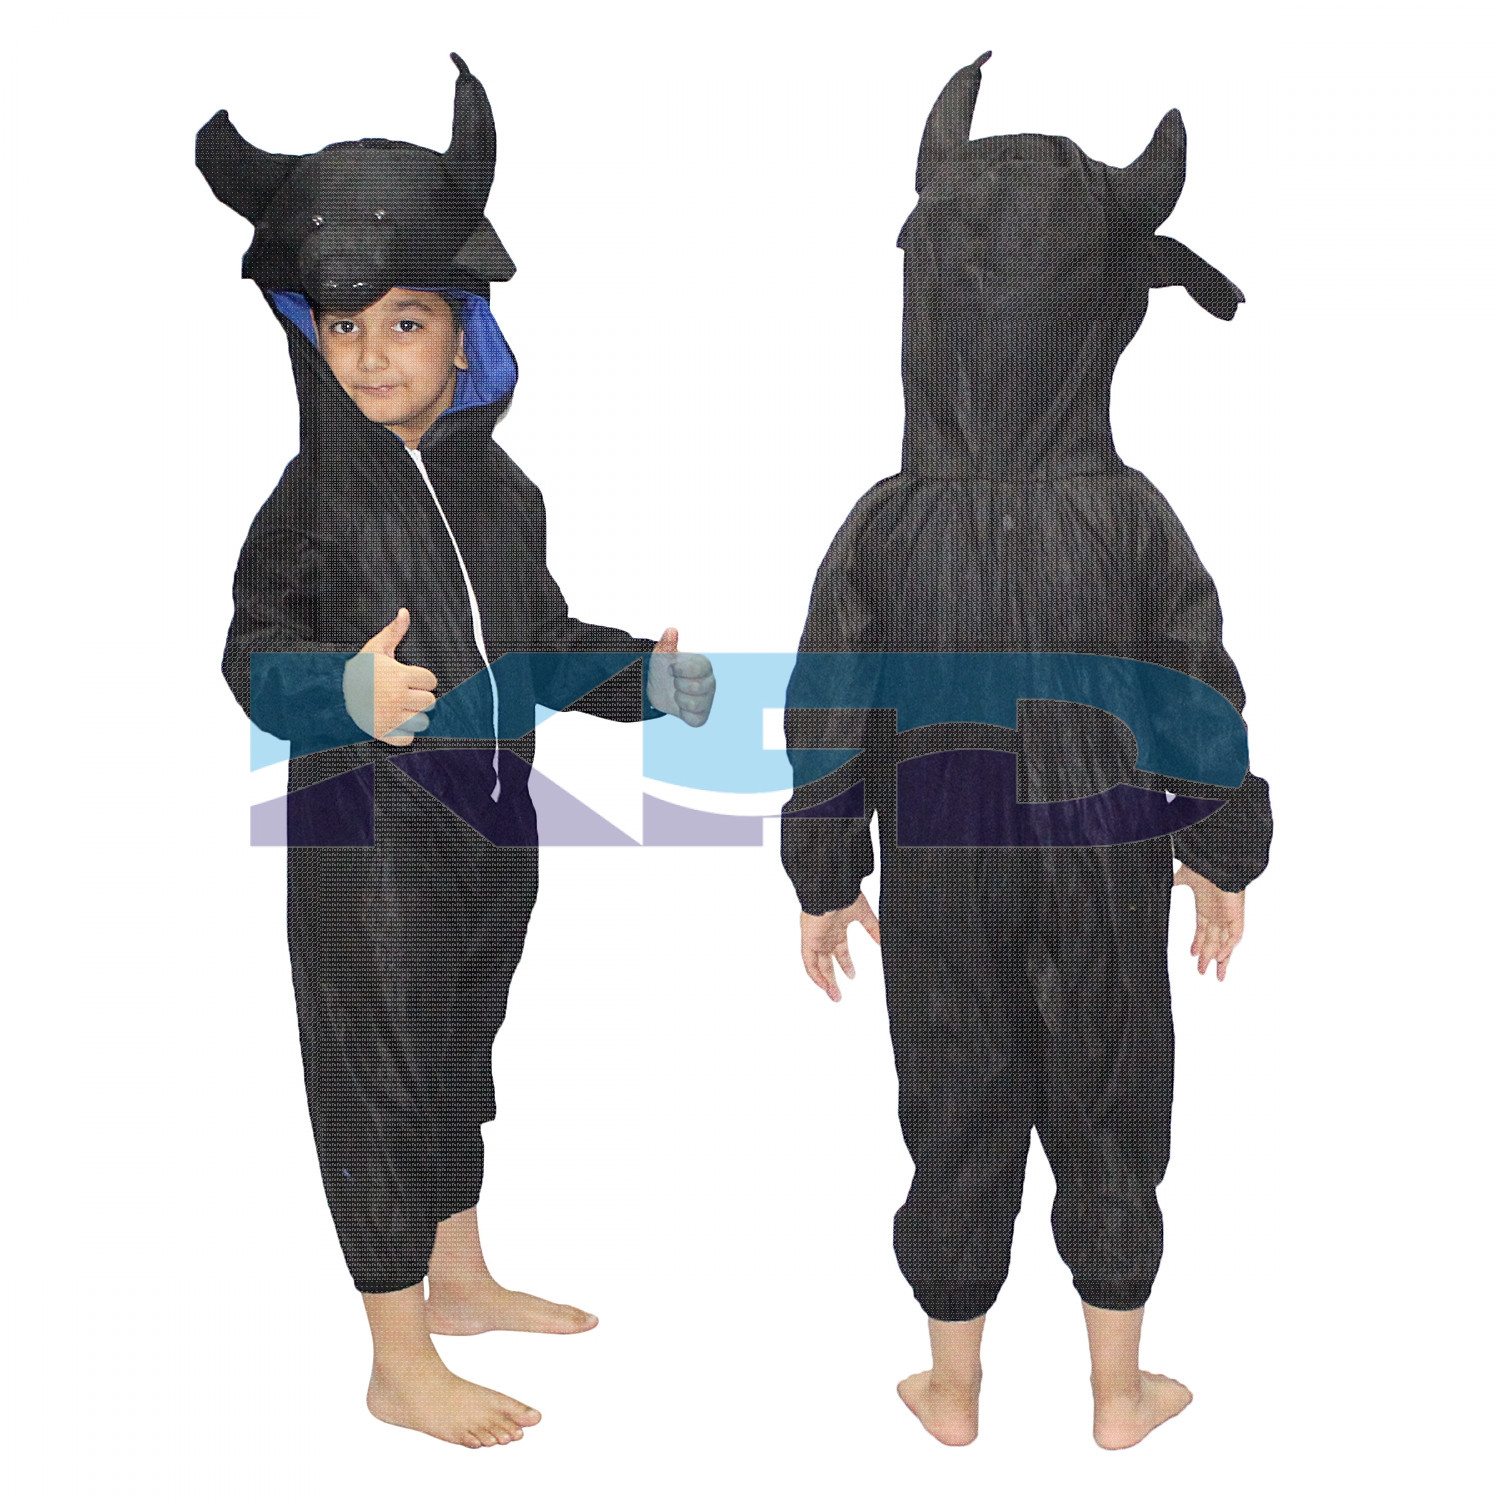 Buffalo fancy dress for kids,Farm Animal Costume for School Annual function/Theme Party/Competition/Stage Shows Dress